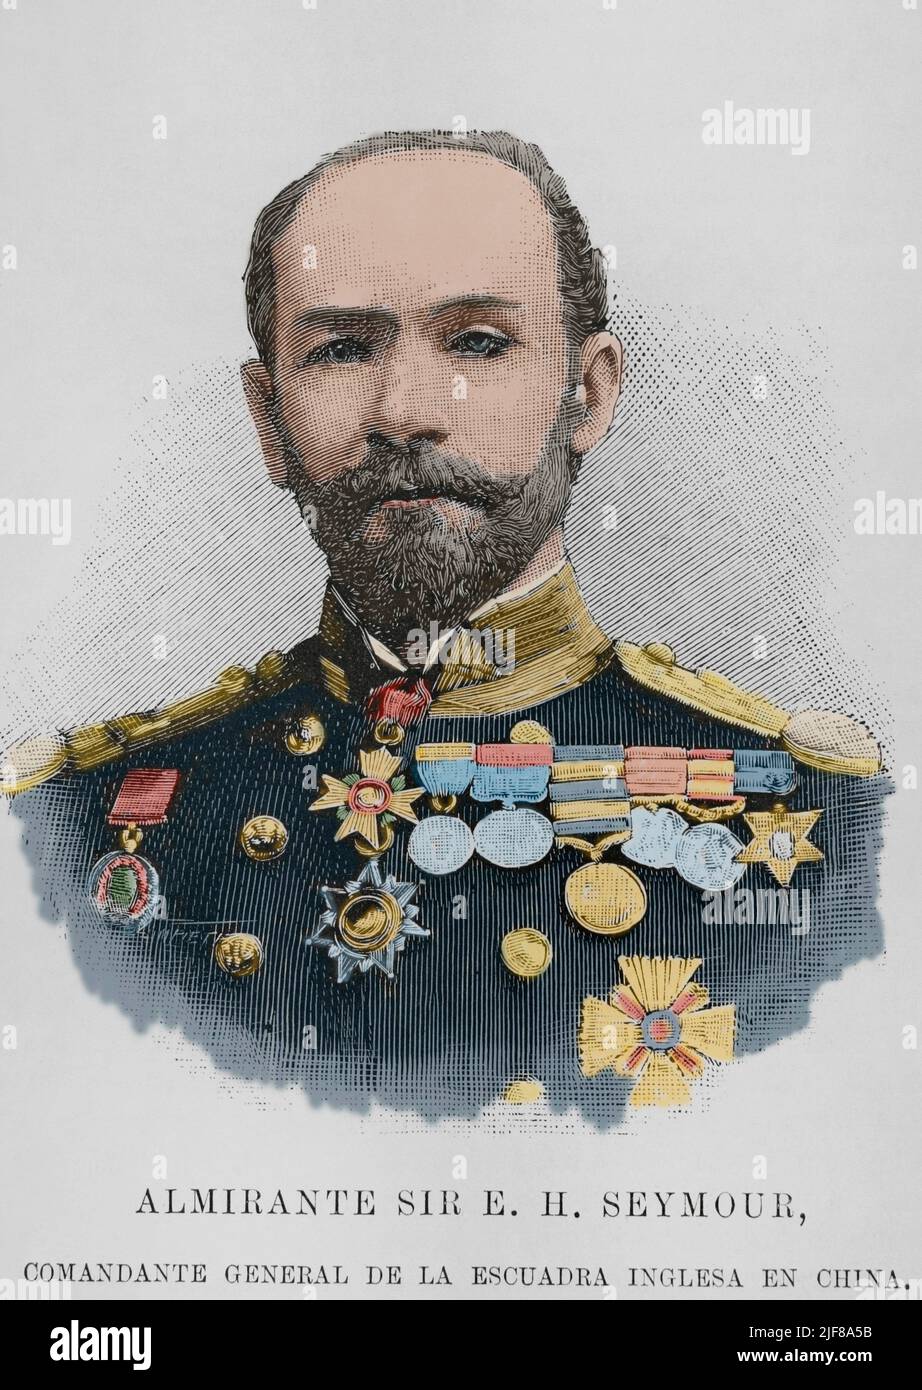 Edward Hobart Seymour (1840-1929). British admiral. Commander-in-Chief of the China Station. Portrait. Engraving. Later colouration. La Ilustración Española y Americana, 1898. Stock Photo